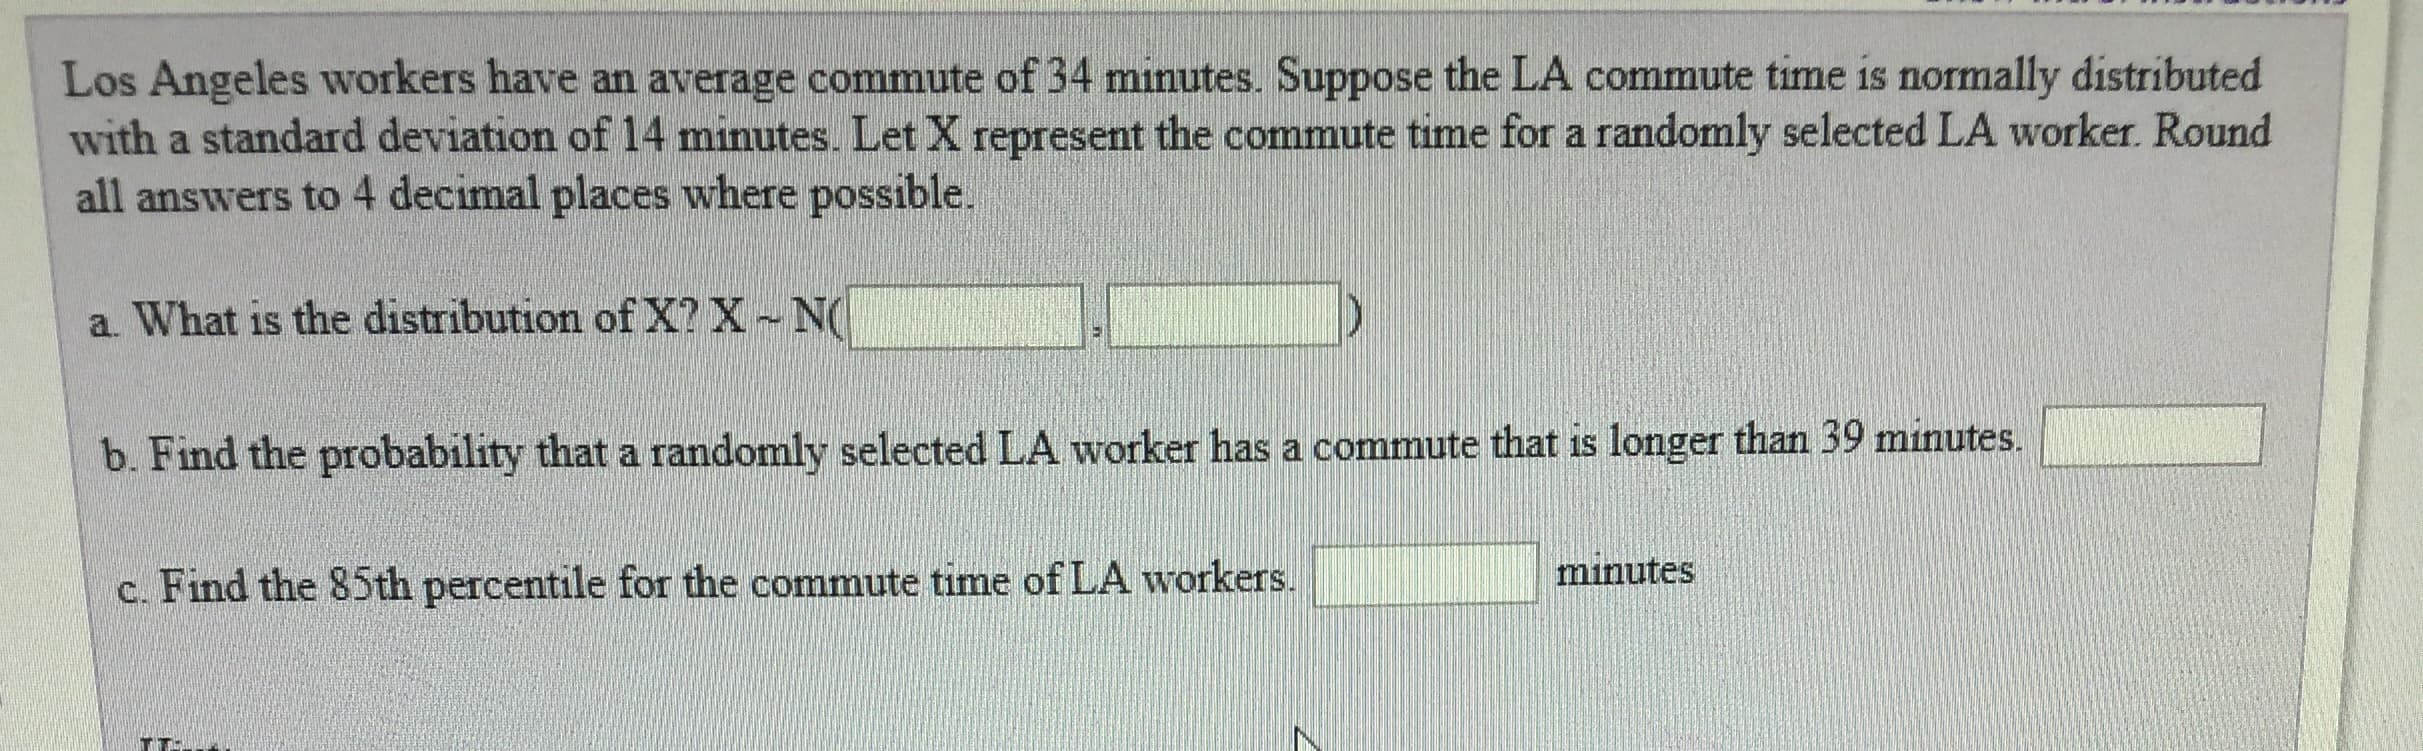 Los Angeles workers have an average commute of 34 minutes. Suppose the LA commute time is normally distributed
with a standard deviation of 14 minutes. Let X represent the commute time for a randomly selected LA worker. Round
all answers to 4 decimal places where possible.
a. What is the distribution of X2 X N
b. Find the probability that a randomly selected LA worker has a commute that is longer than 39 minutes.
c. Find the 85th percentile for the commute time ofLA workers
minutes
